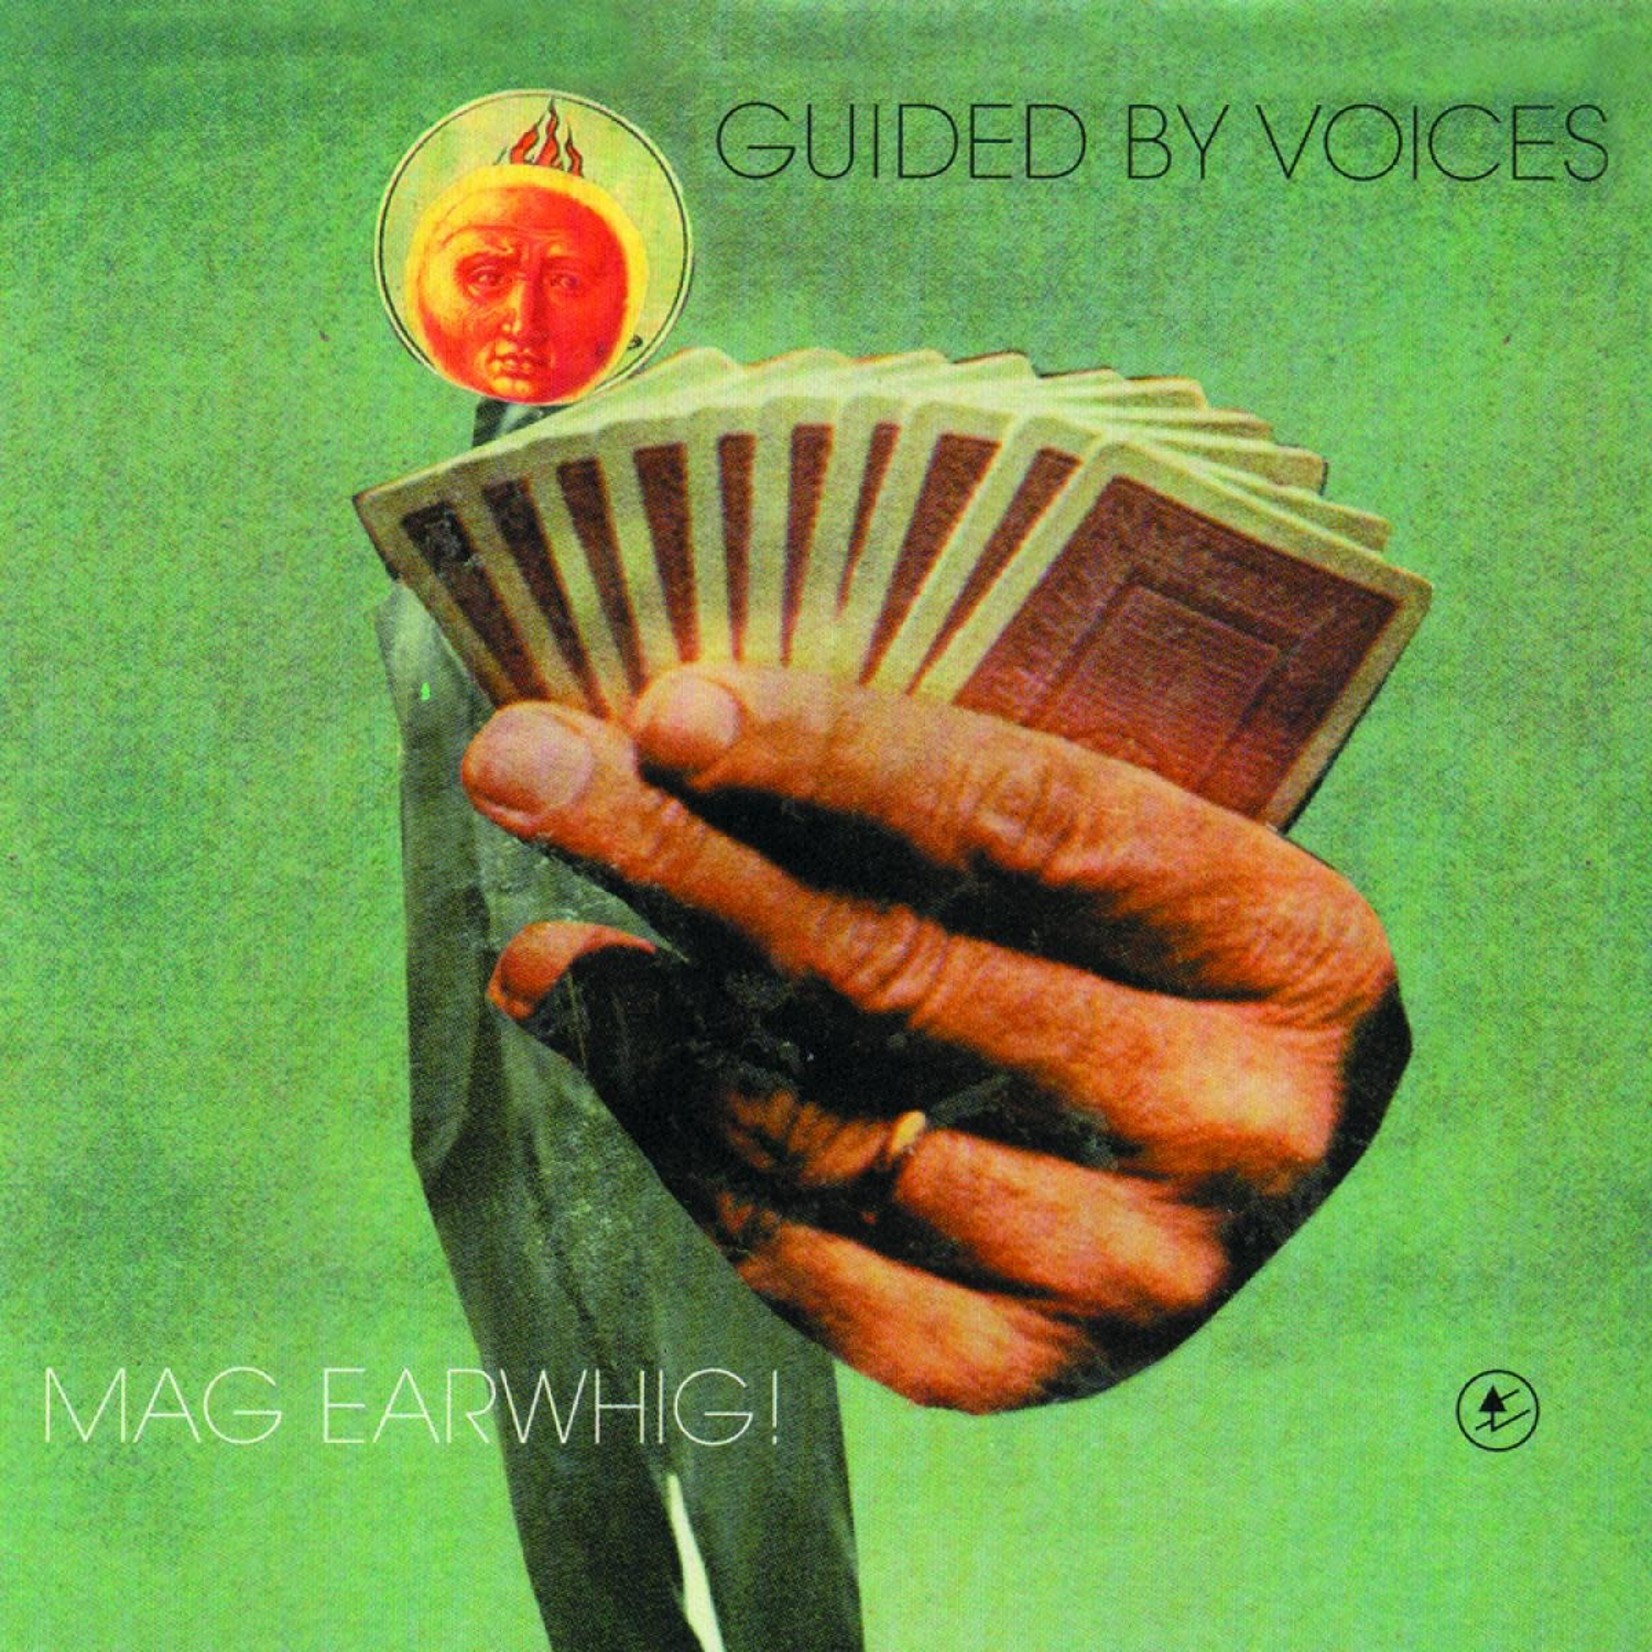 Matador Guided By Voices - Mag Earwhig! (LP)